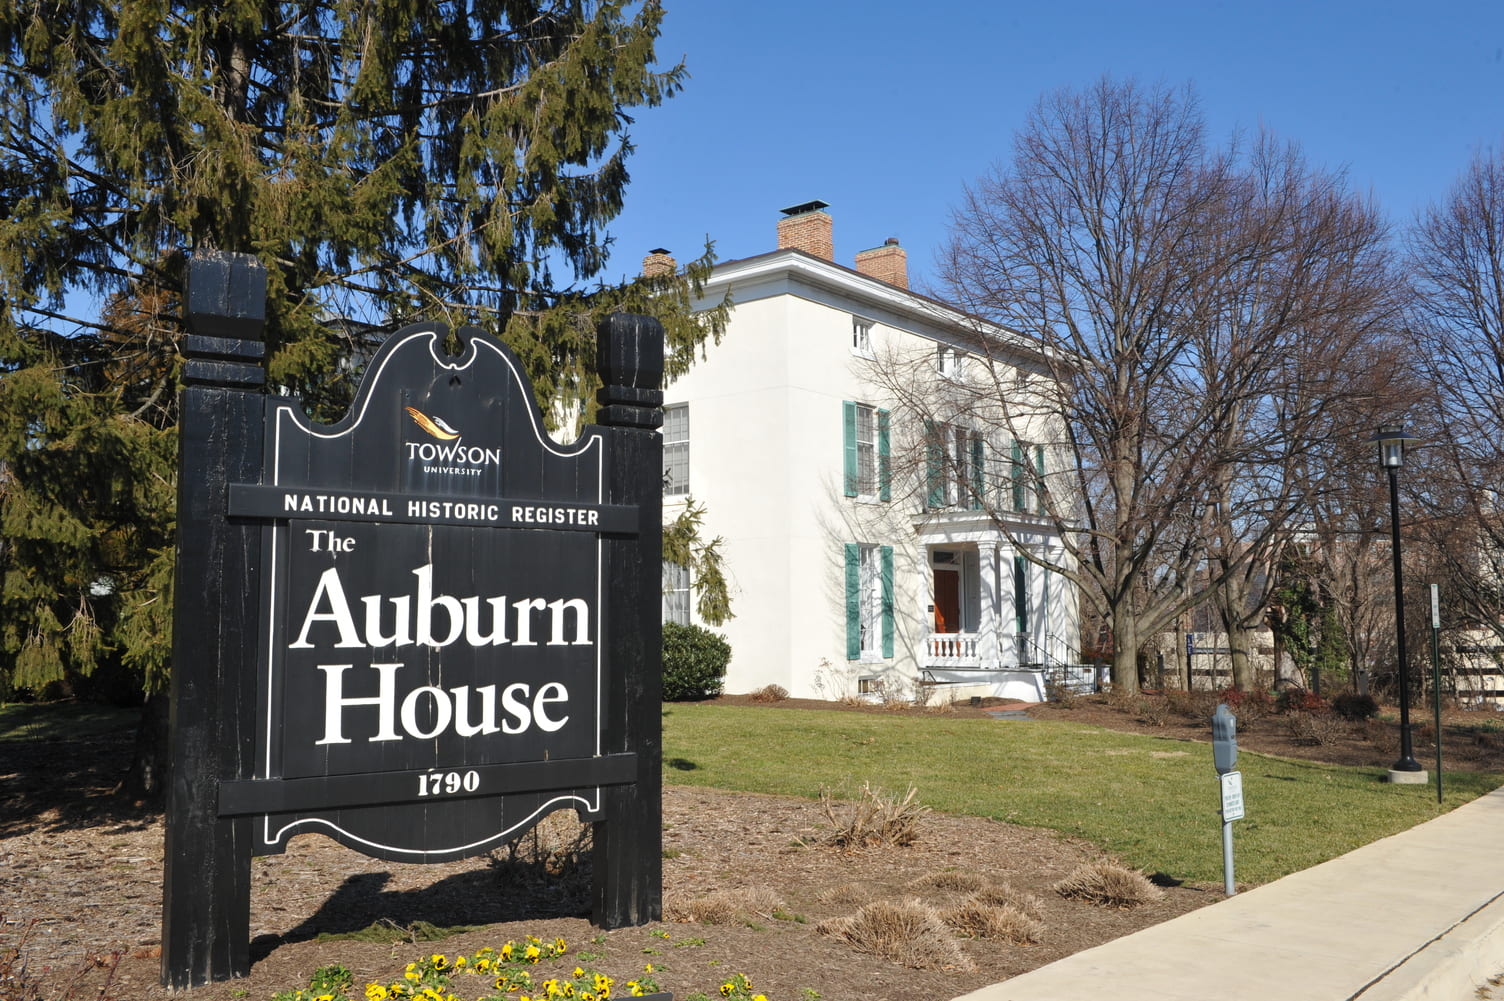 As Auburn House looked in 2015.